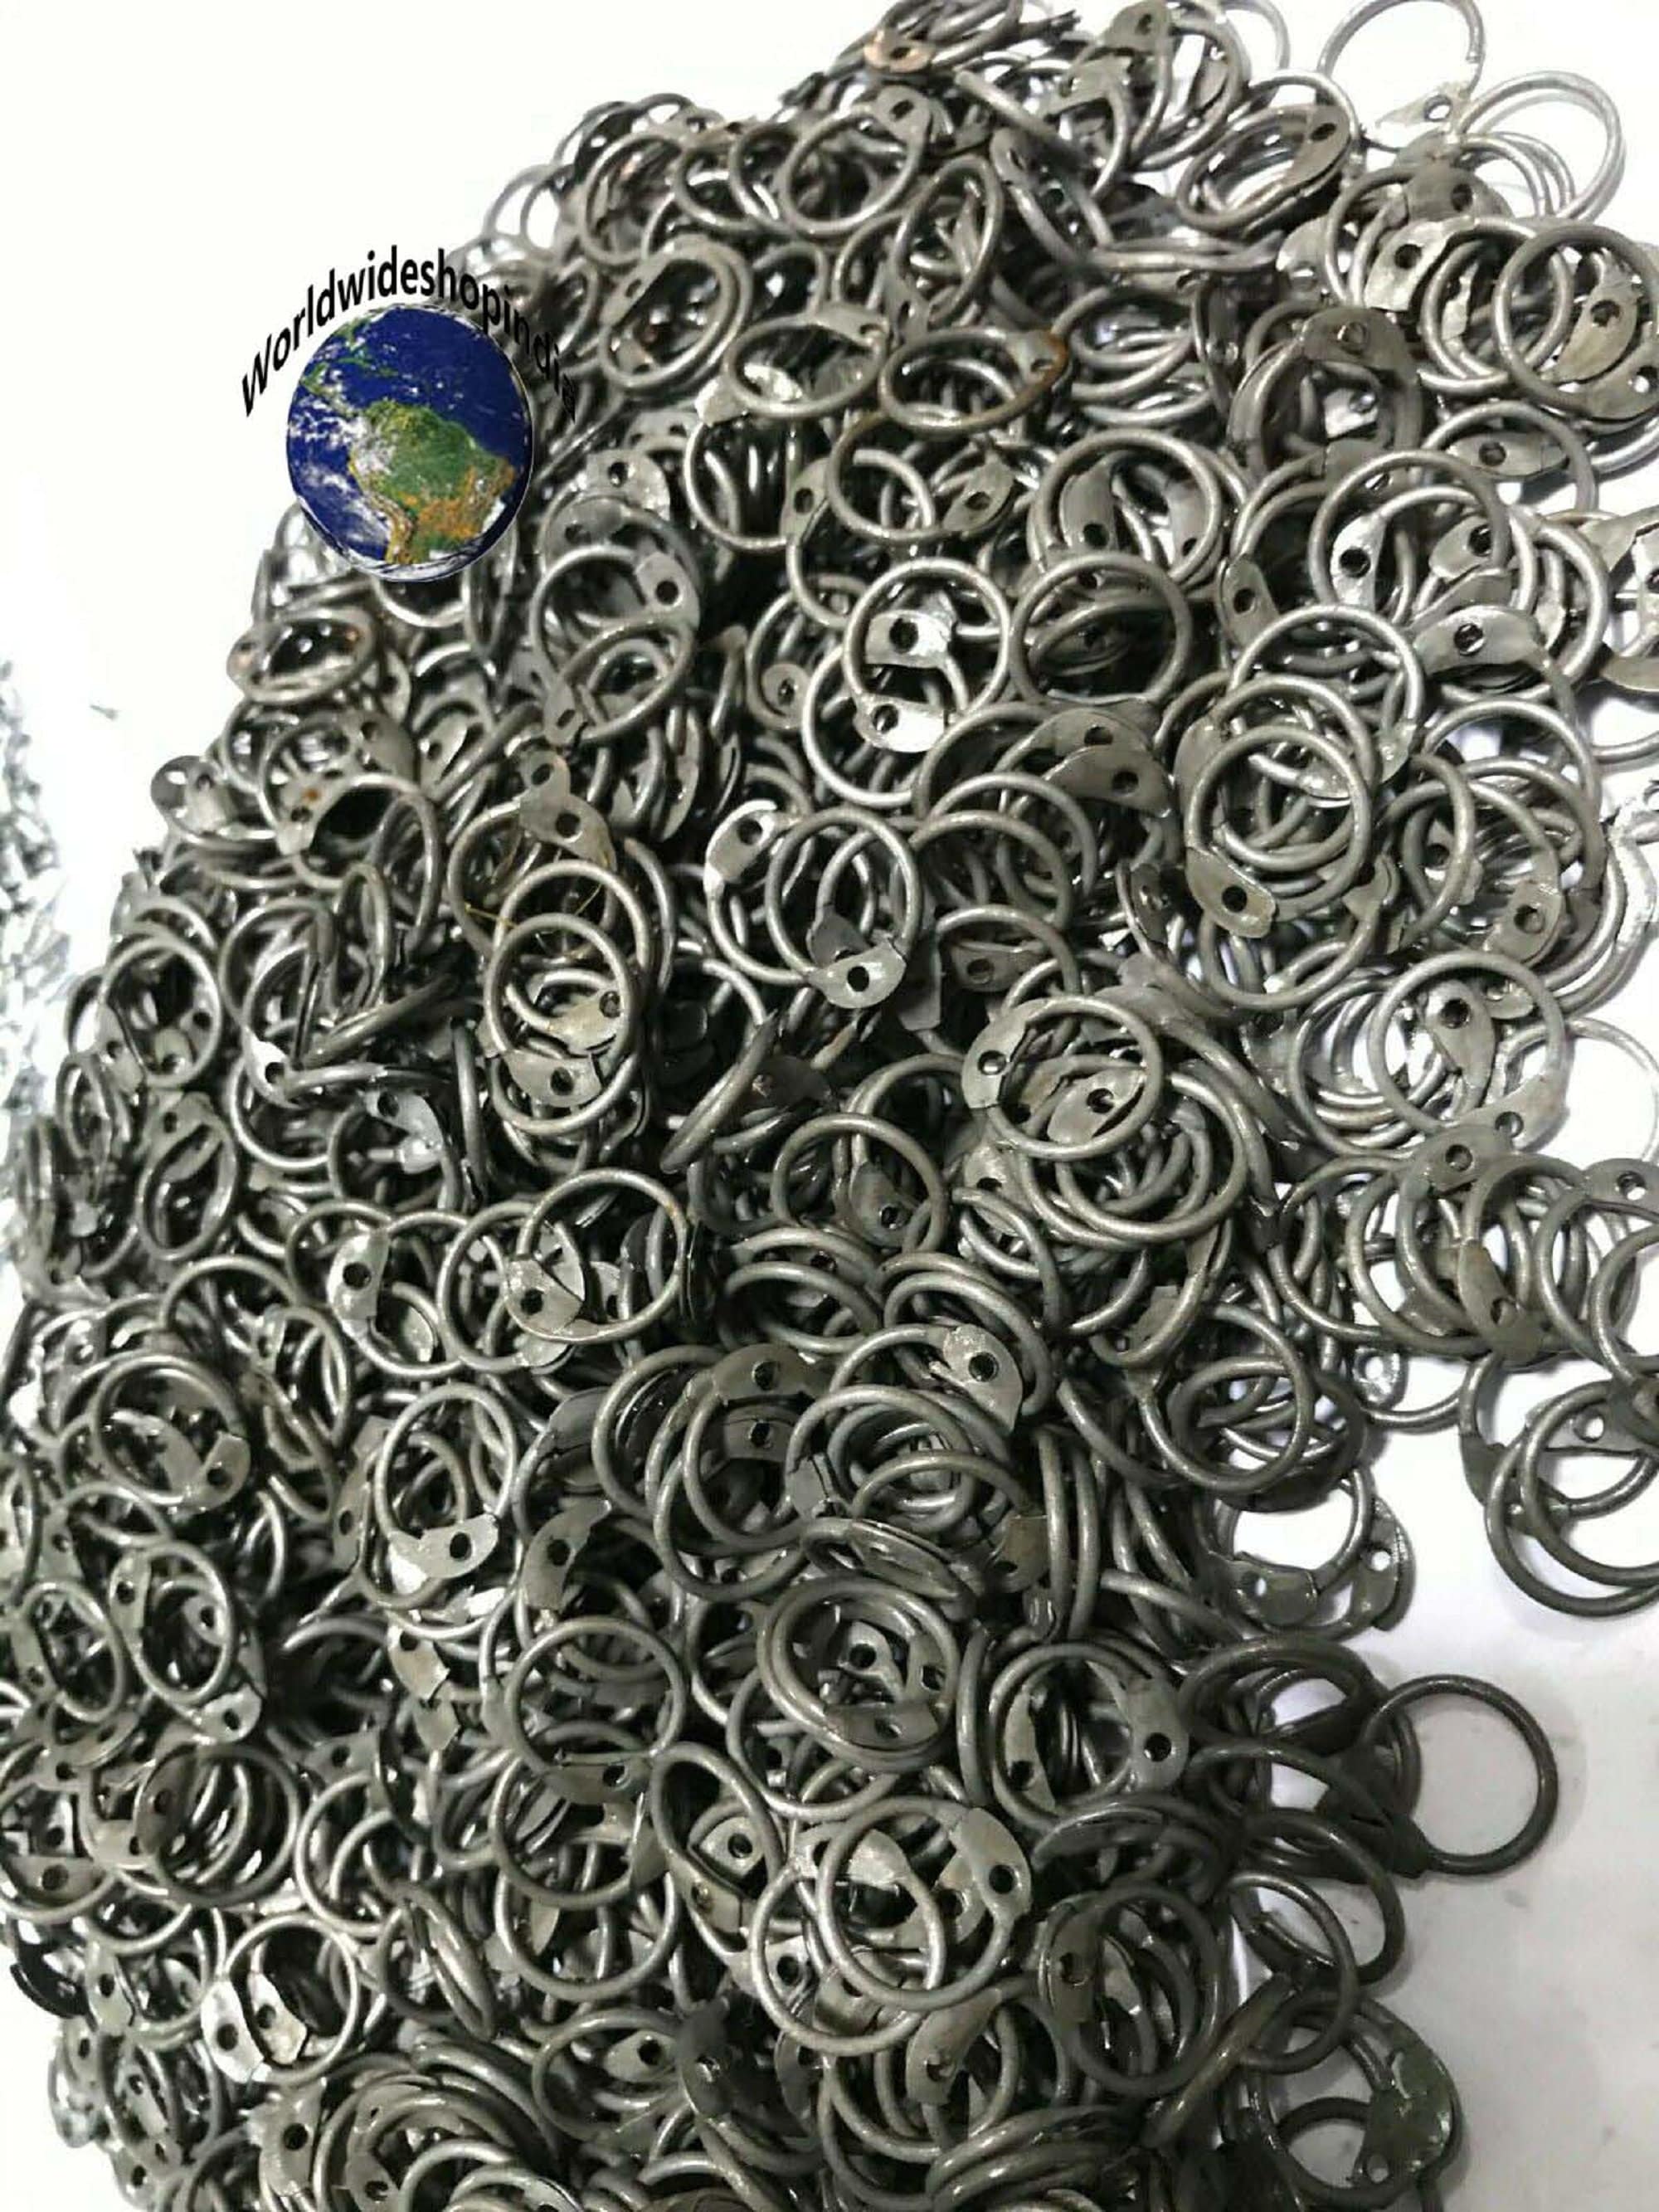 Brass Butted Chainmail Rings